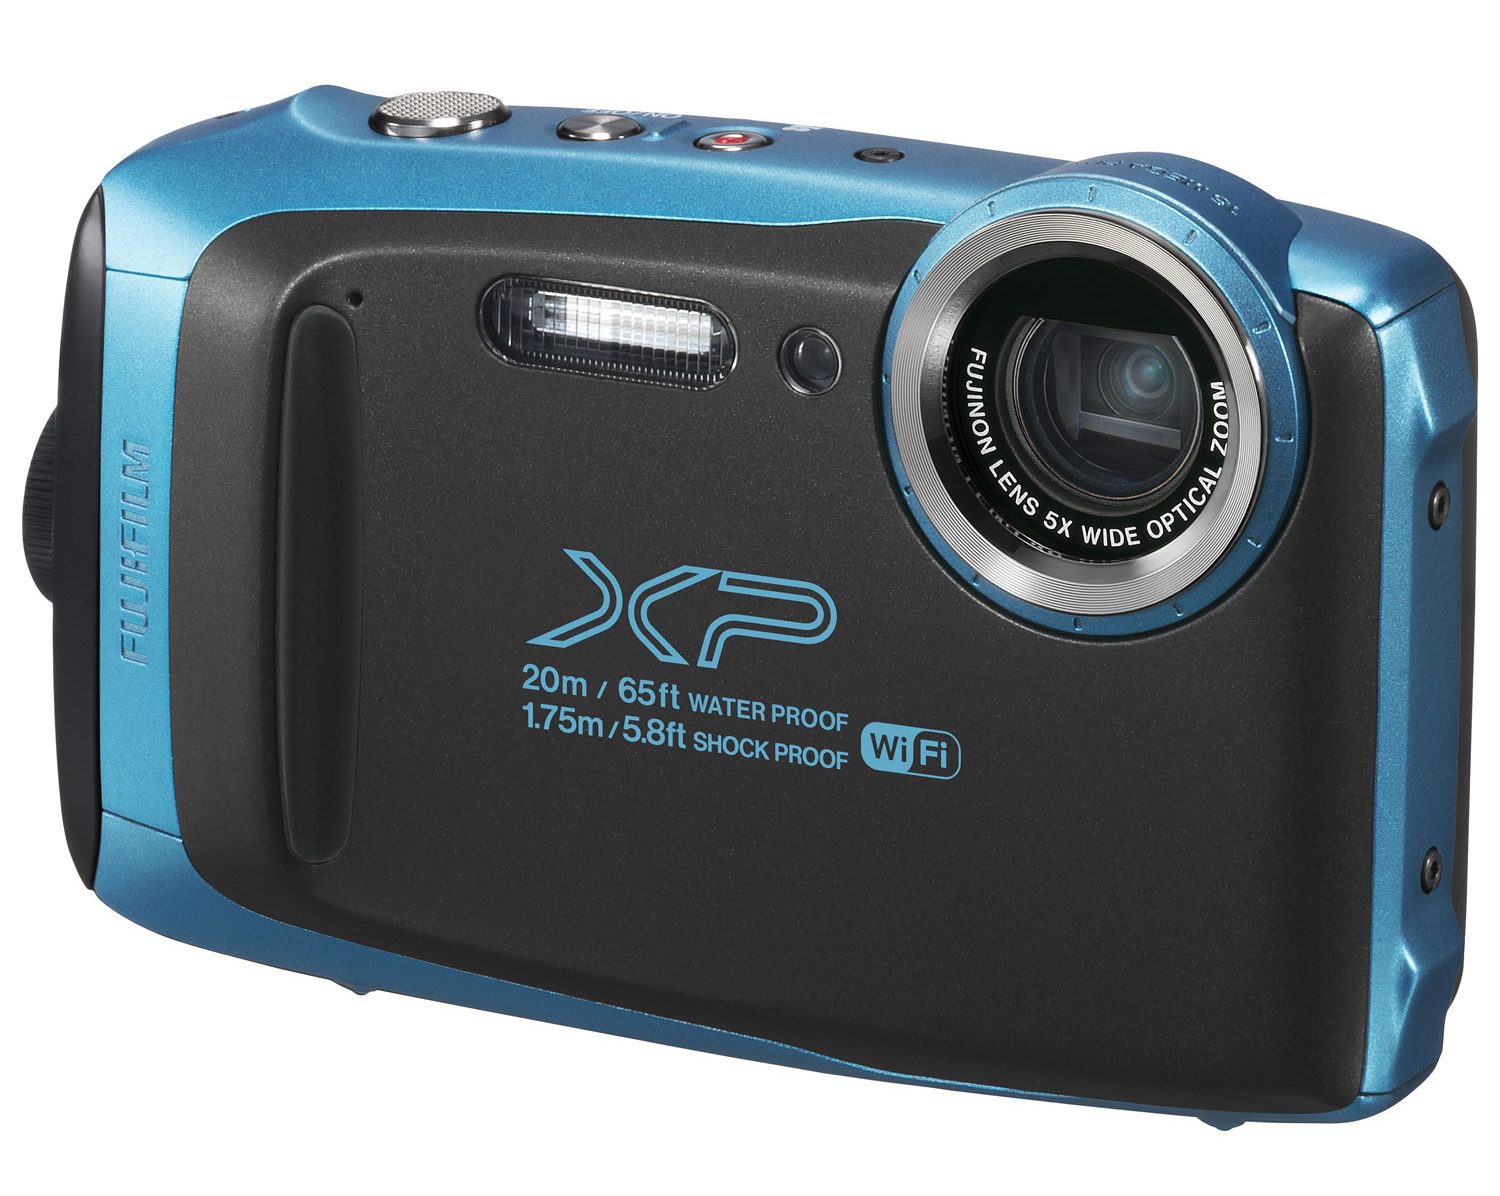 A photo of the front of the Fujifilm FinePix XP130